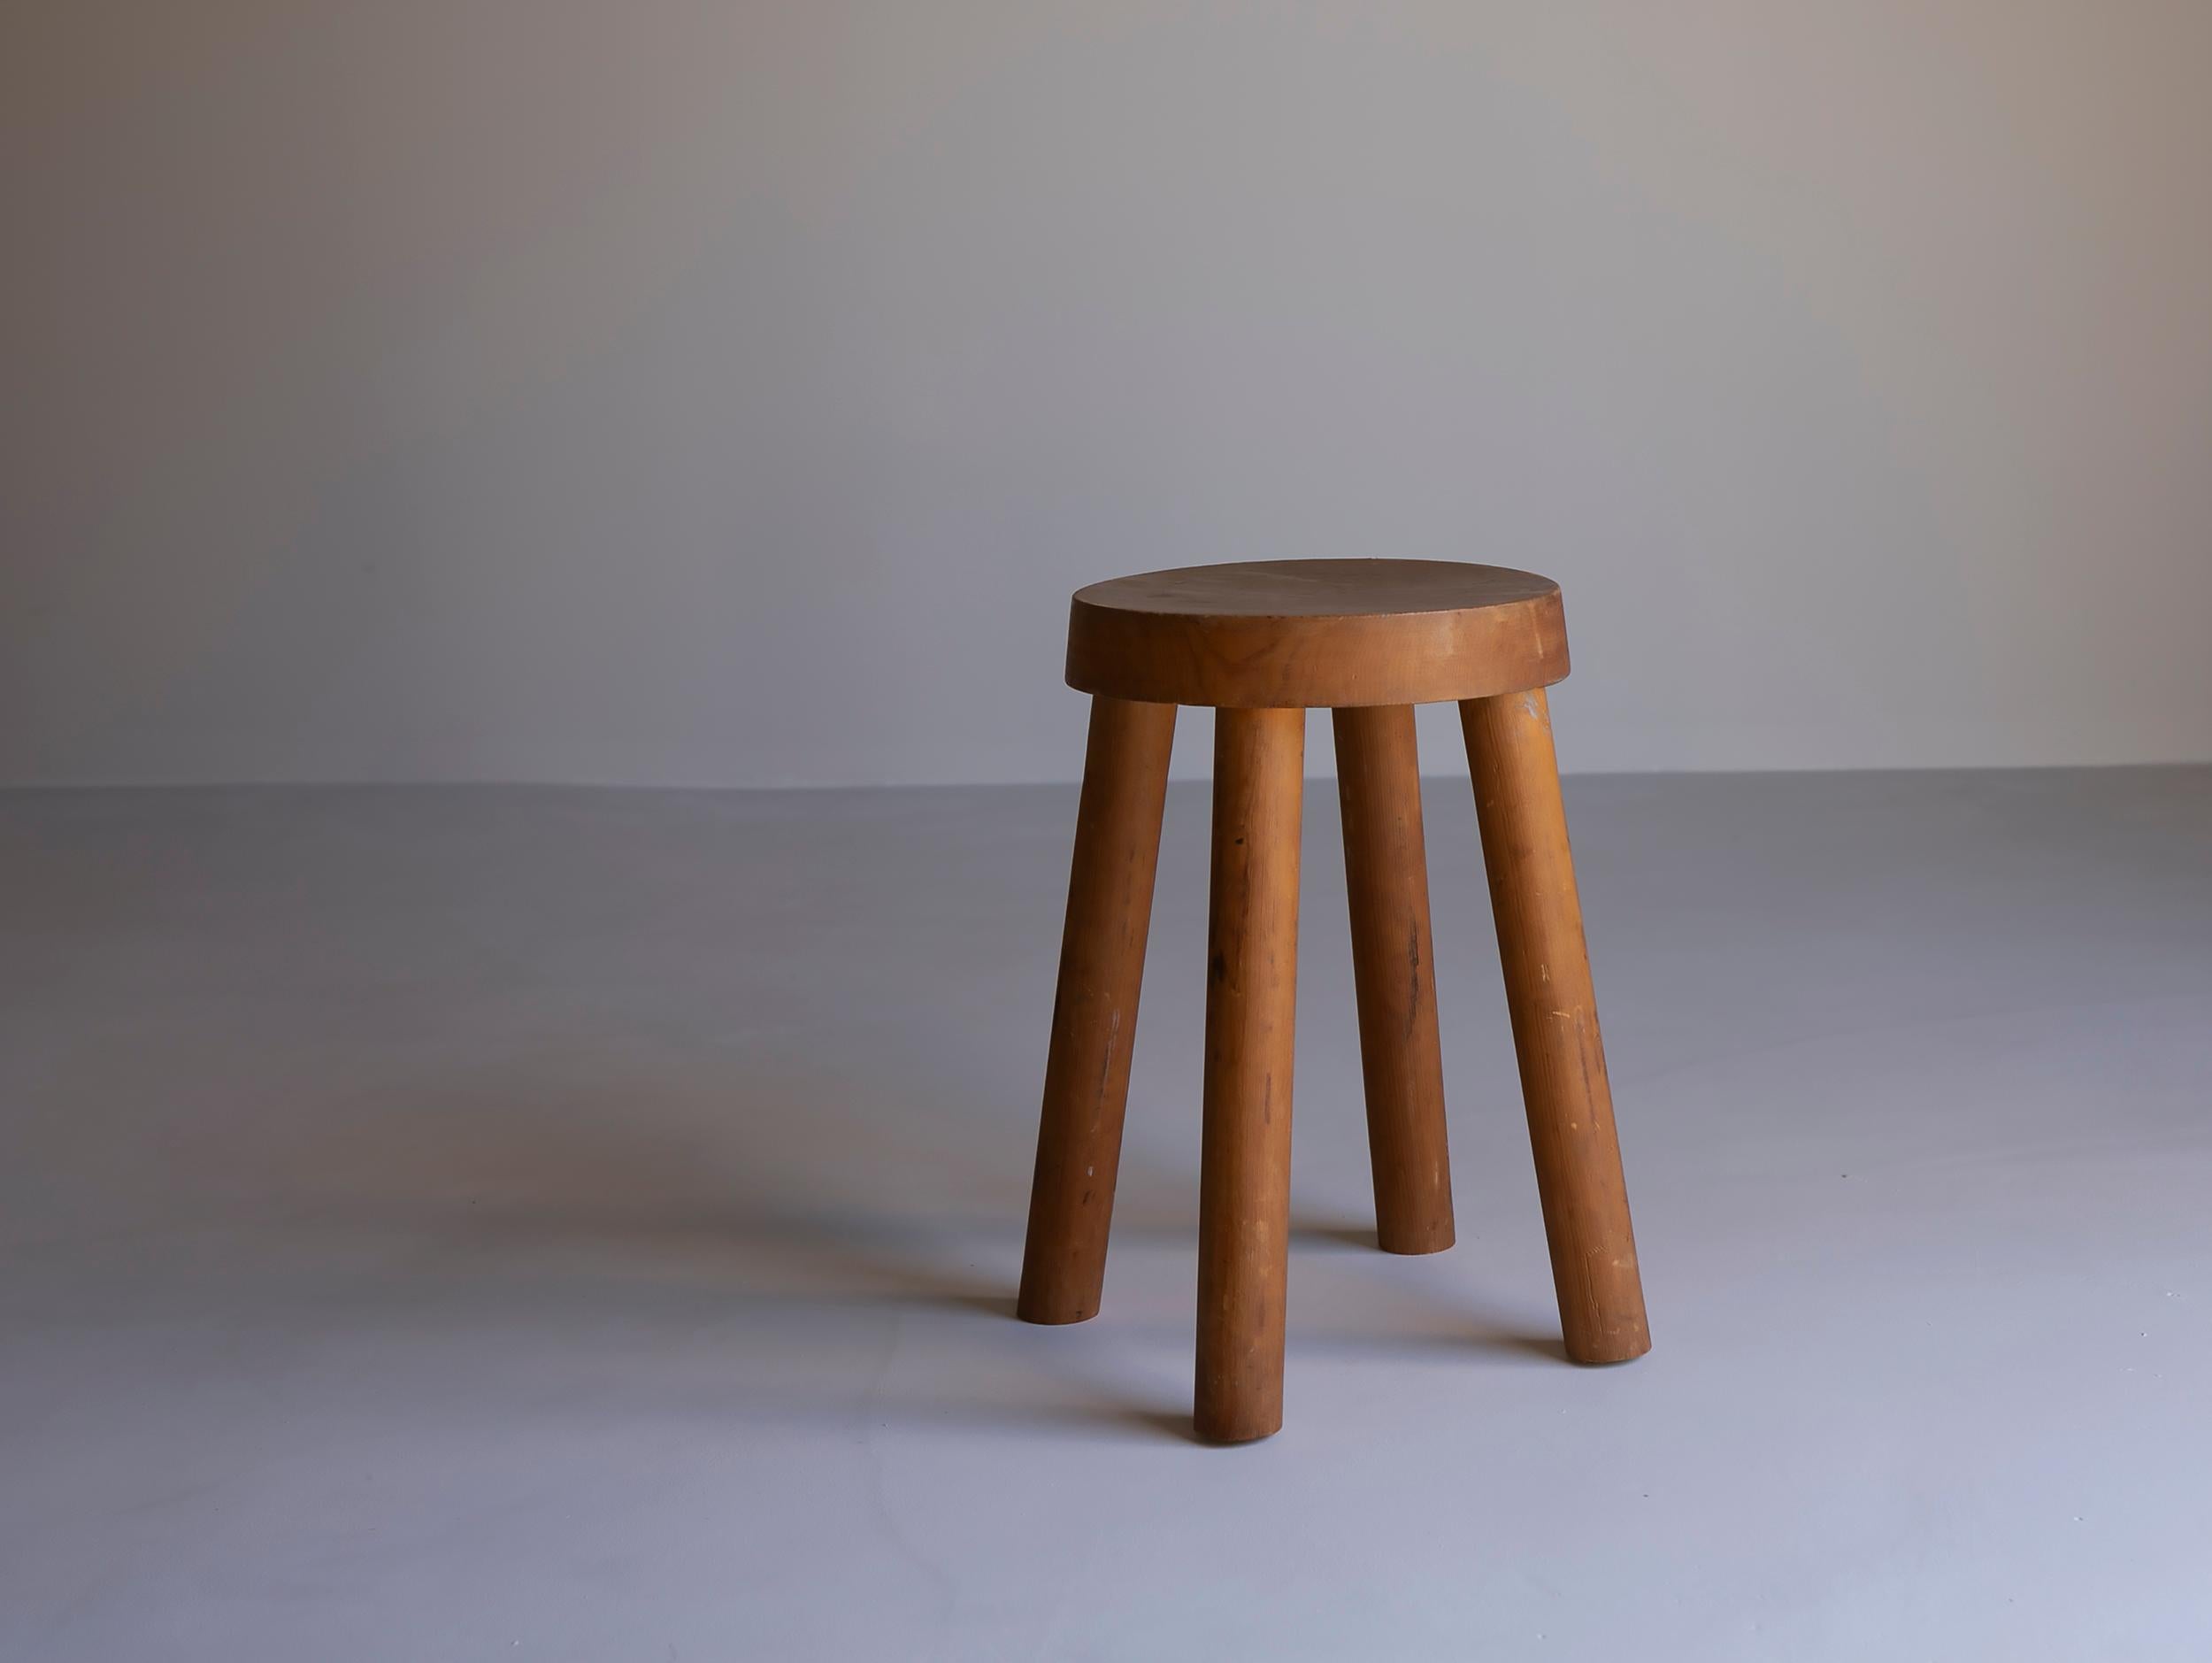 French Wood Stool for Méribel Ski Resort by Charlotte Perriand